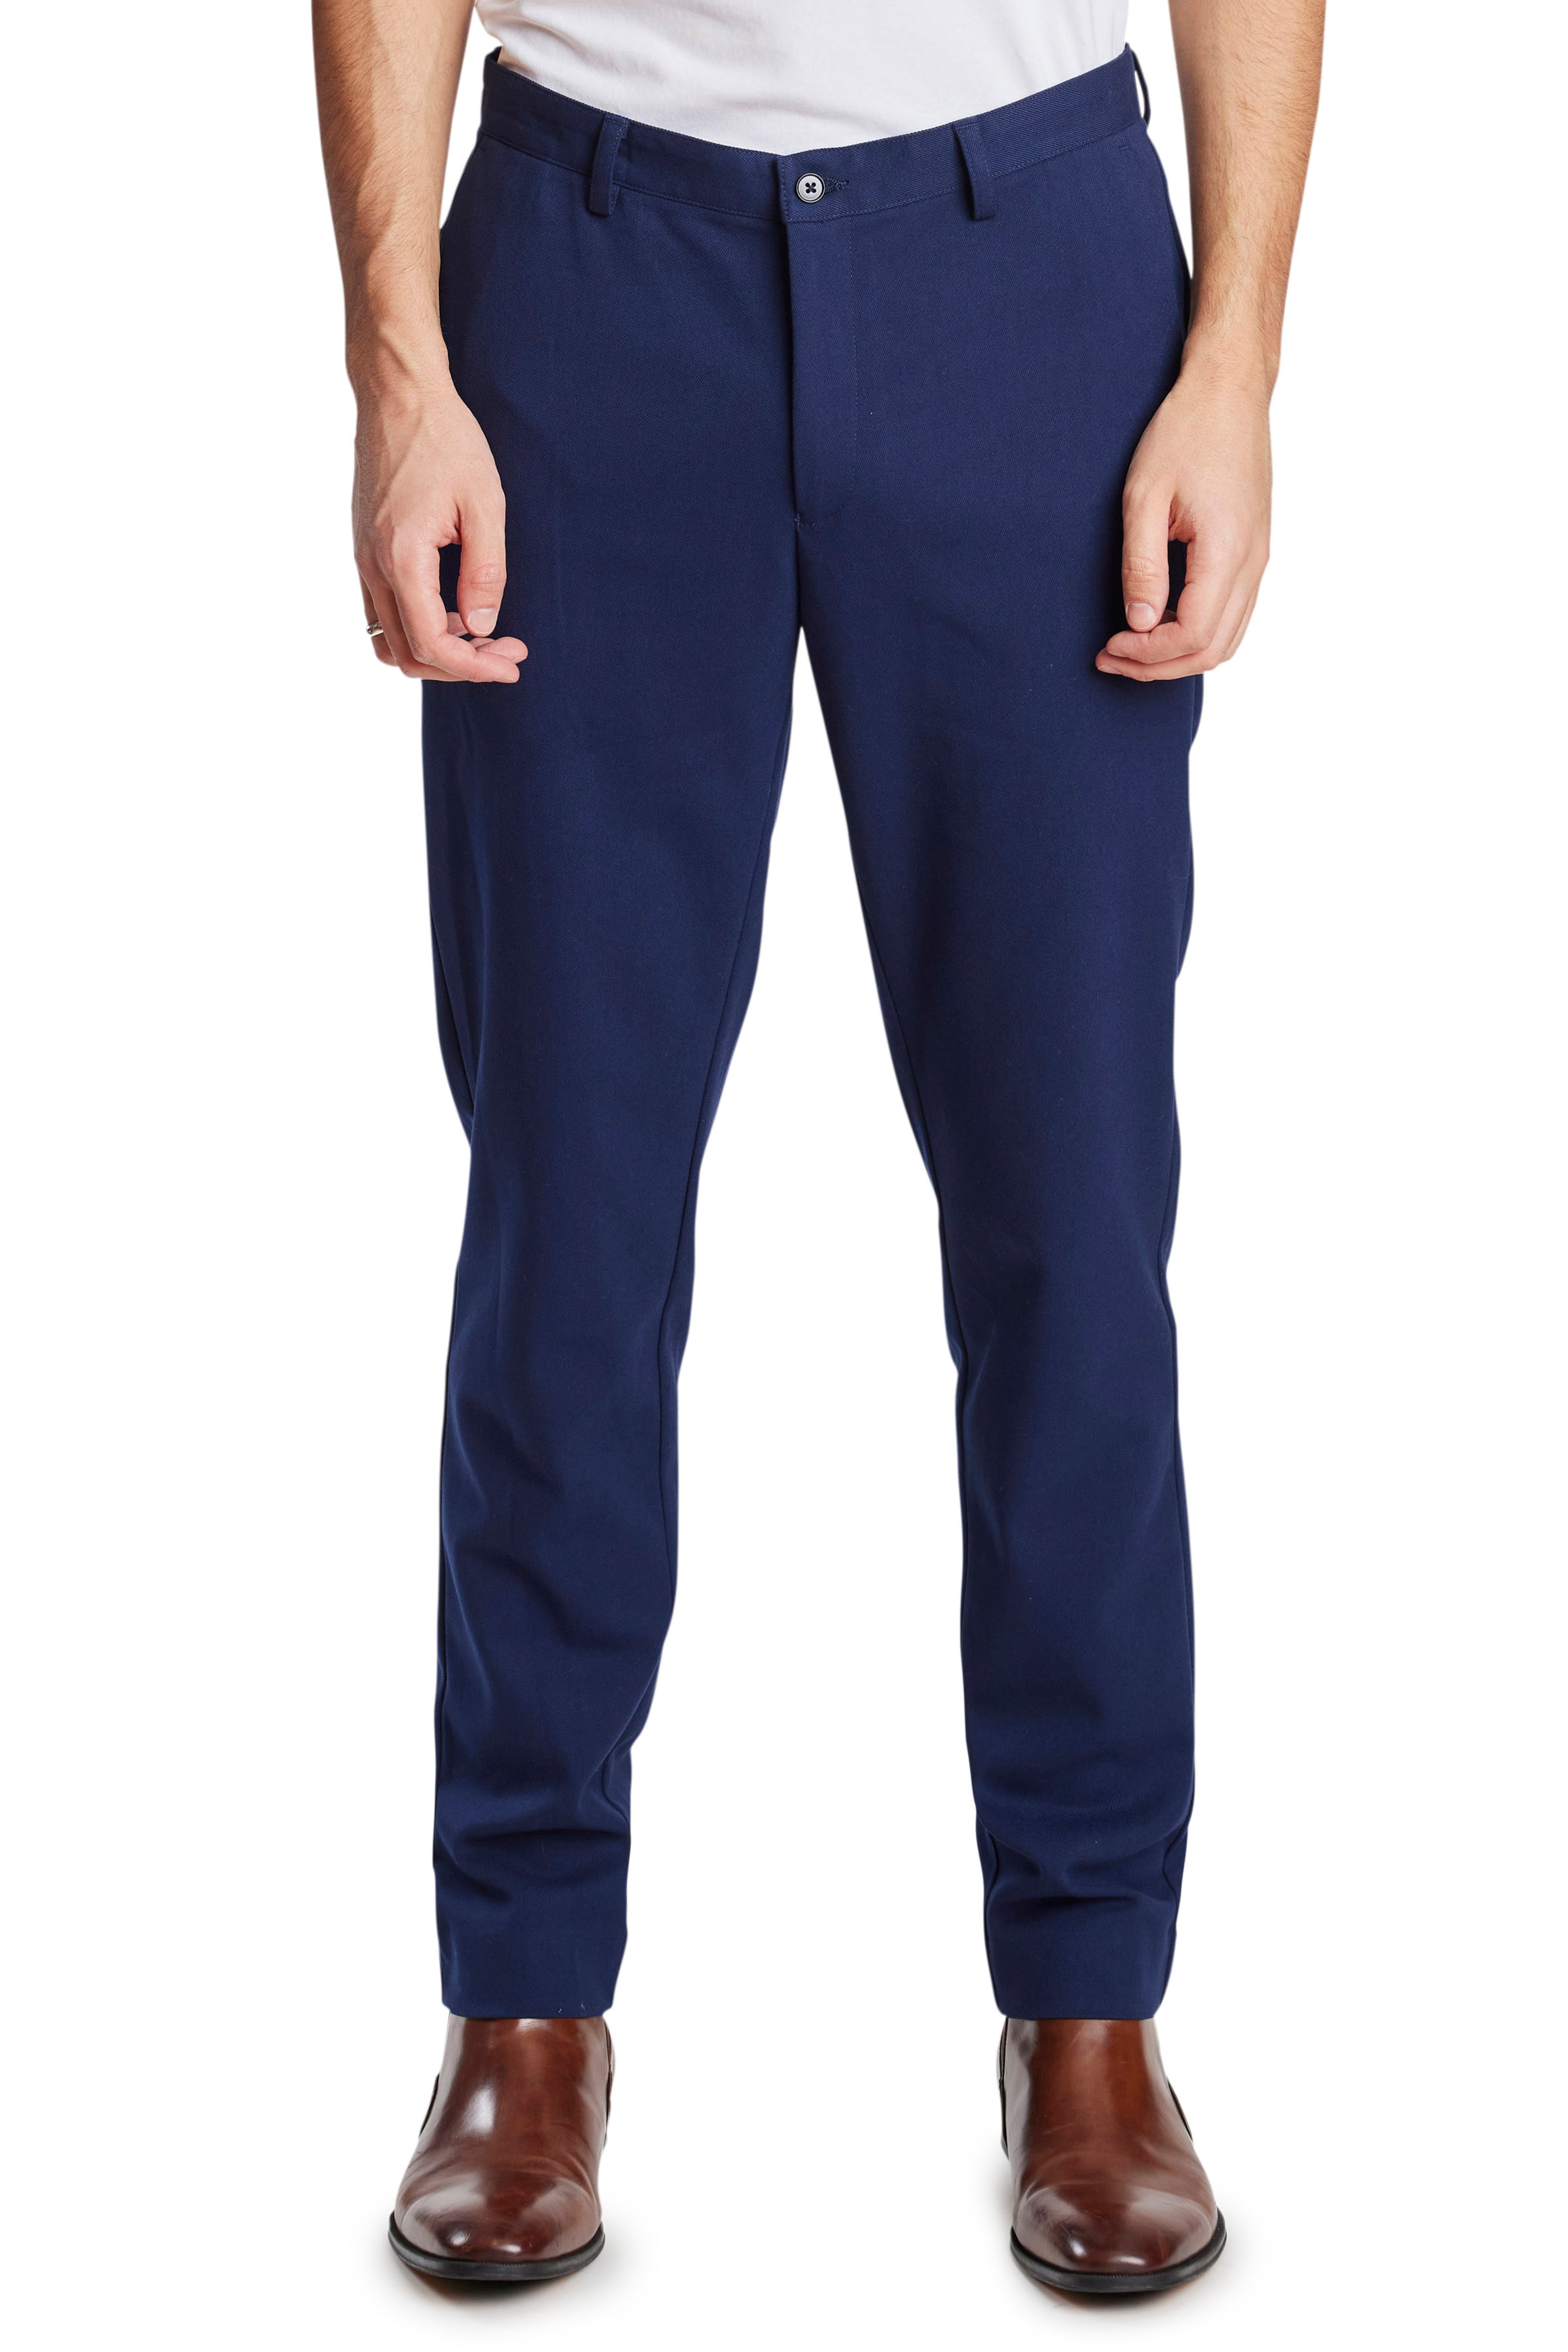 High Waisted Plus Size Maternity Casual Pants - Blue